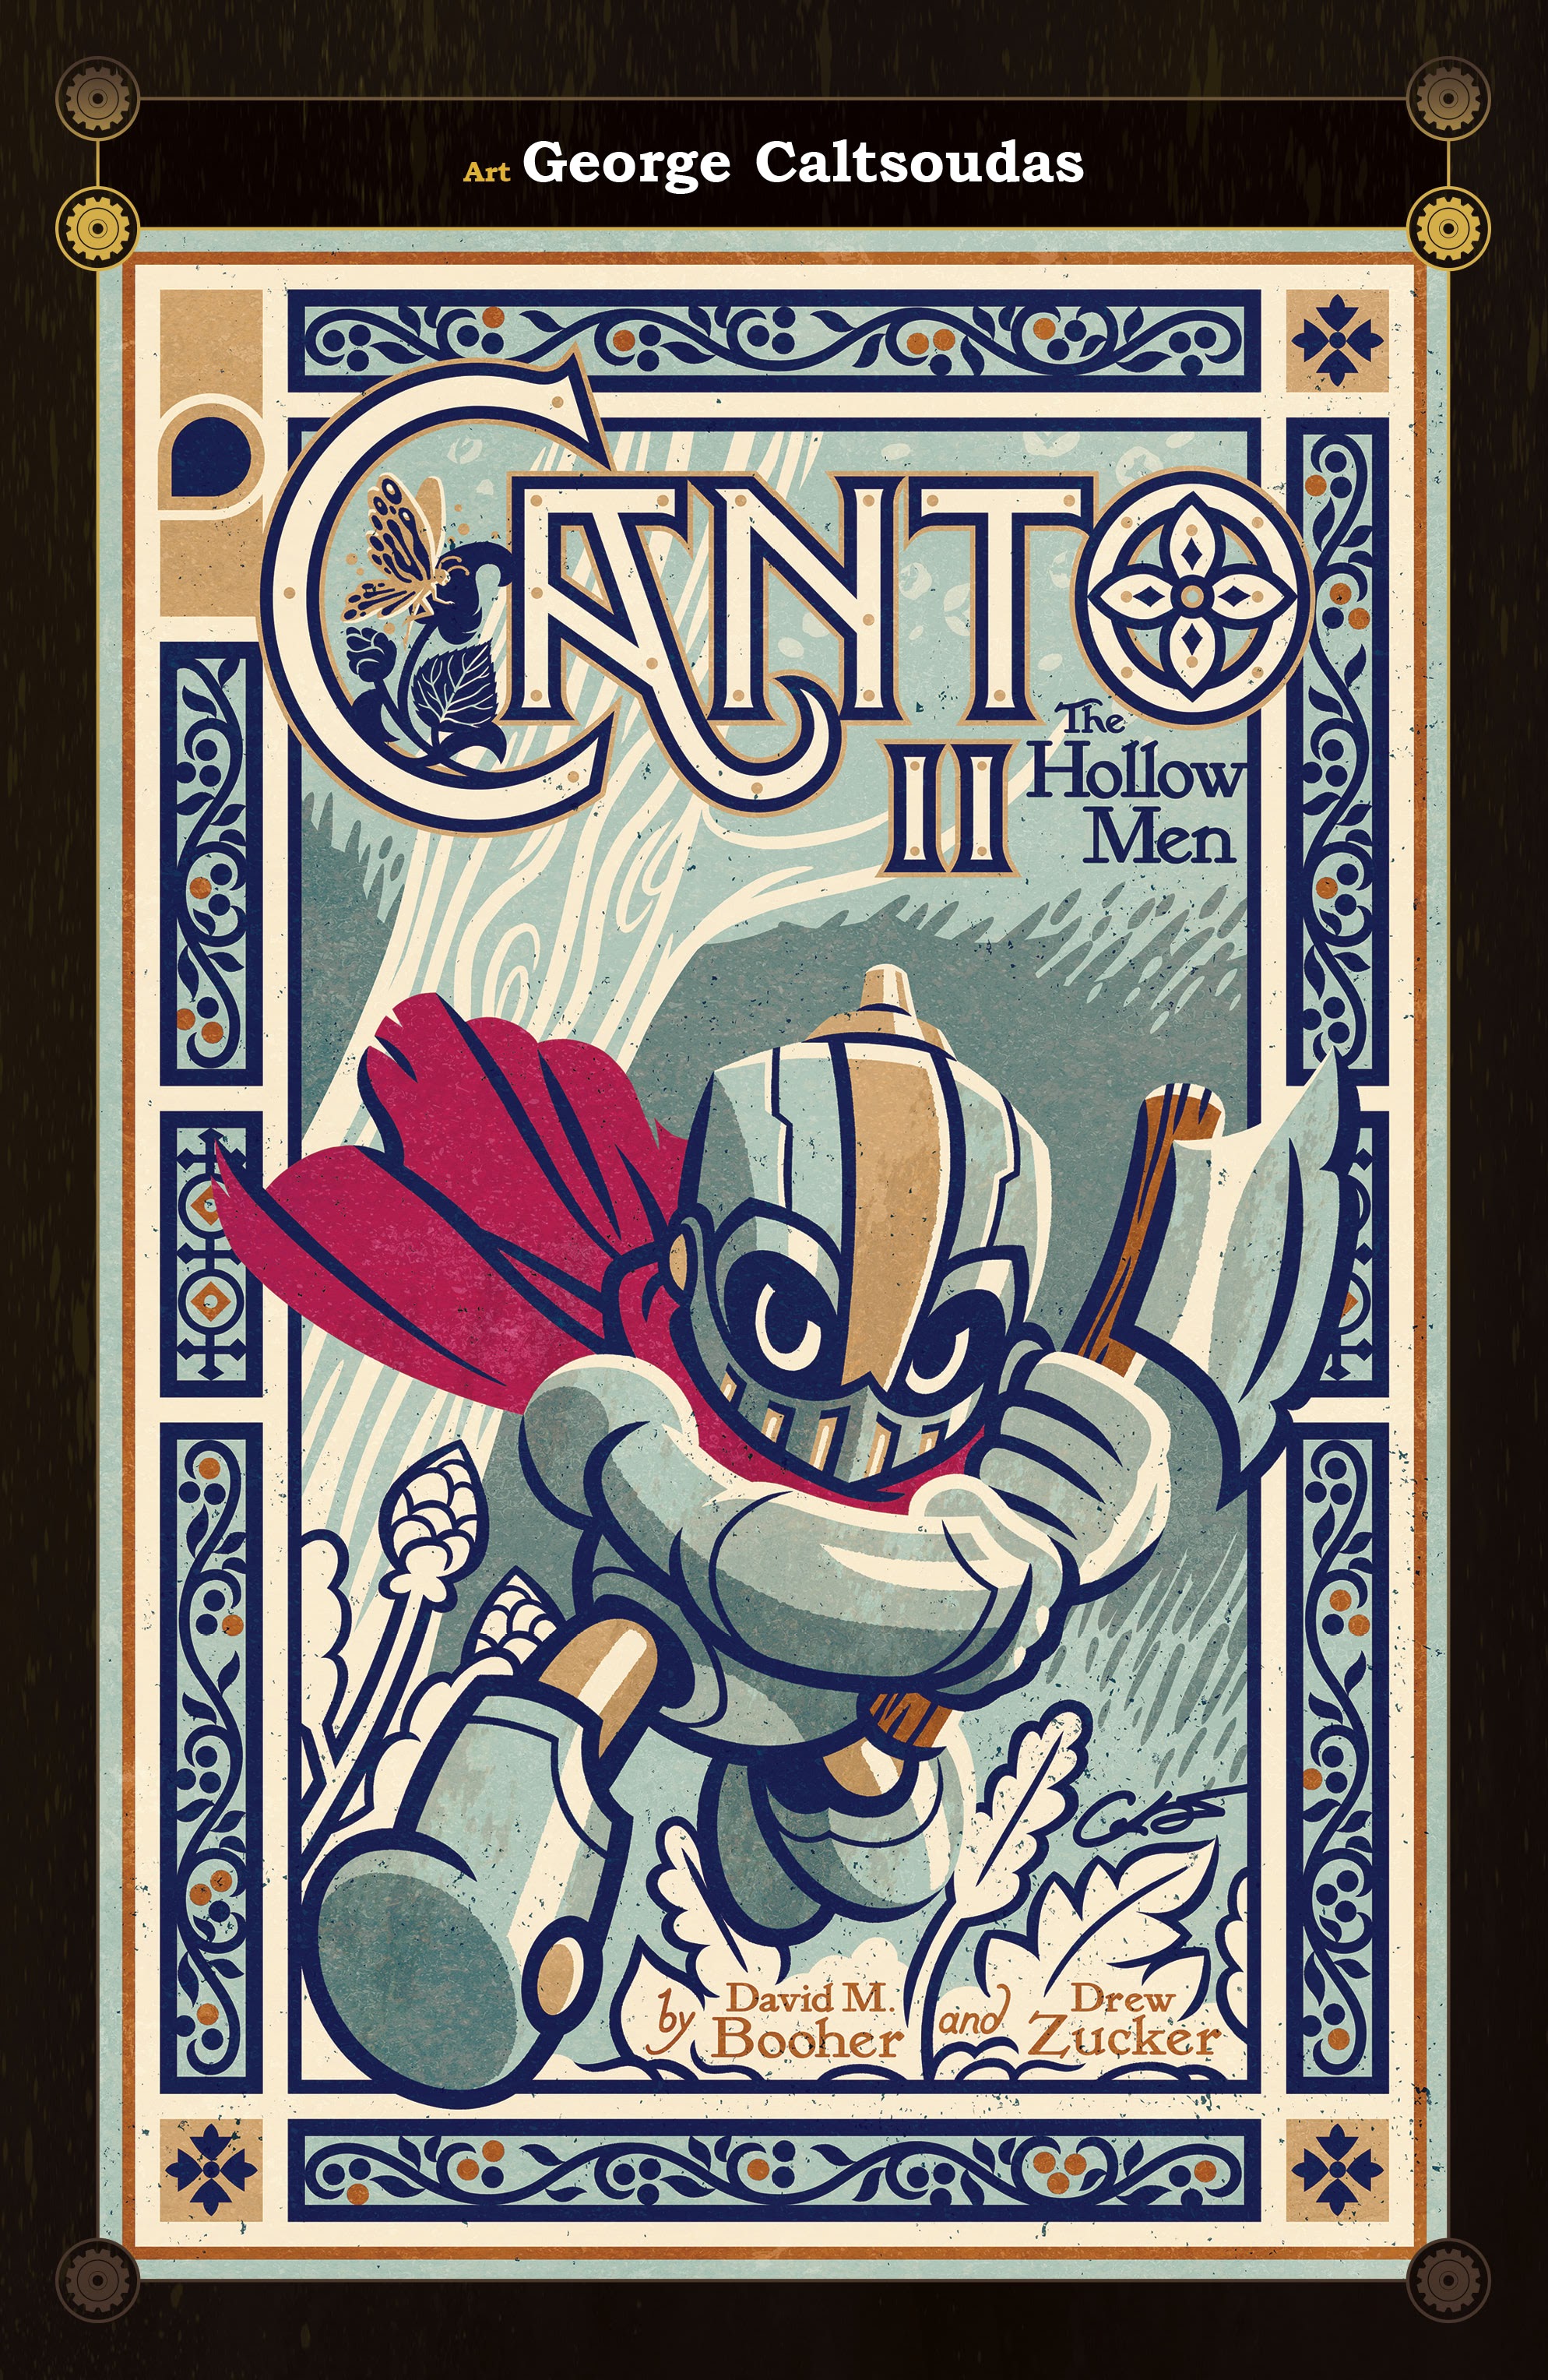 Read online Canto II: The Hollow Men comic -  Issue #1 - 27